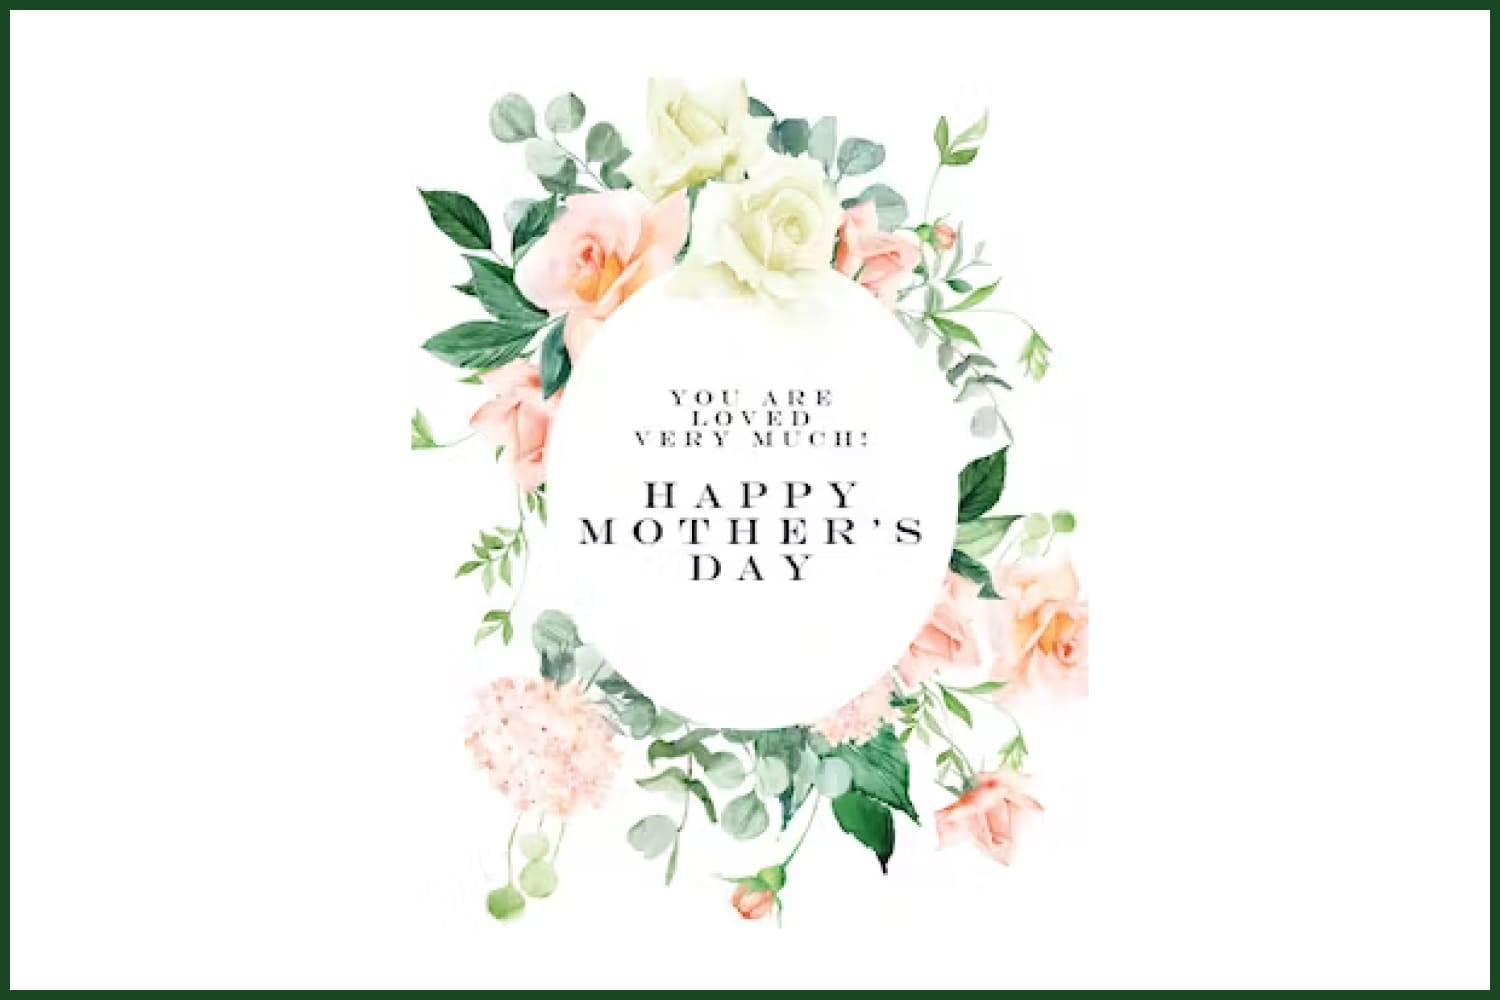 Image of card for mother's day with flowers and simple text.